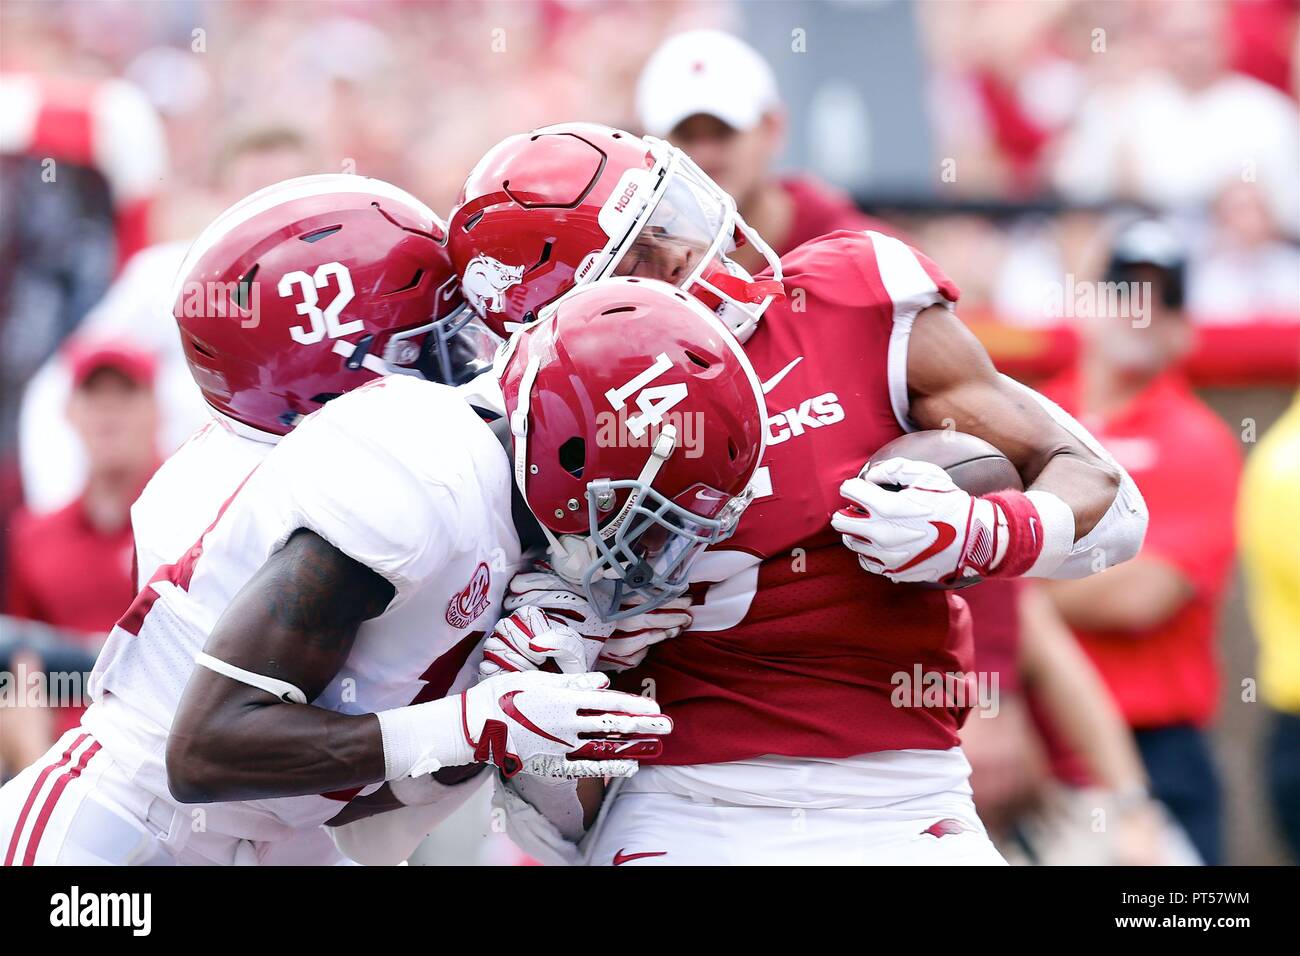 Oct 6, 2018: Alabama defenders Dylan Moses #32 and Deionte Thompson #14 lay a hit on Arkansas running back Rakeem Boyd #5. Alabama defeated Arkansas 65-31 at Donald W. Reynolds Stadium in Fayetteville, AR, Richey Miller/CSM Stock Photo